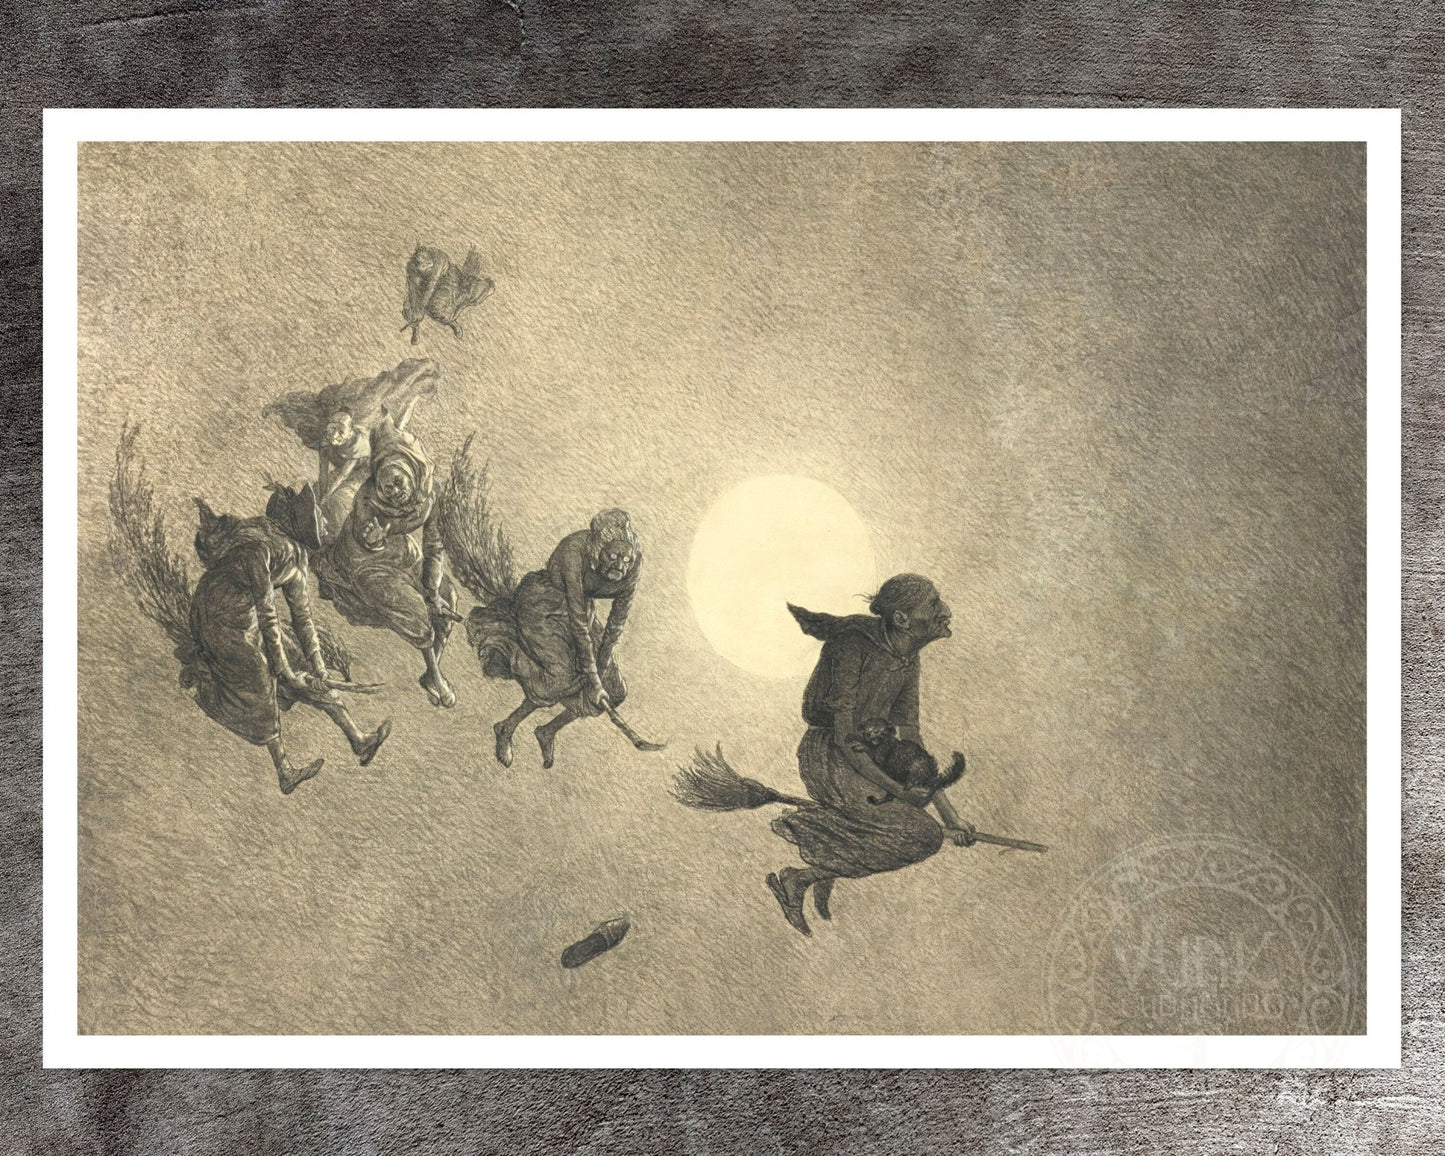 William Holbrook Beard "The Witches' Ride" (c.1870) - Mabon Gallery